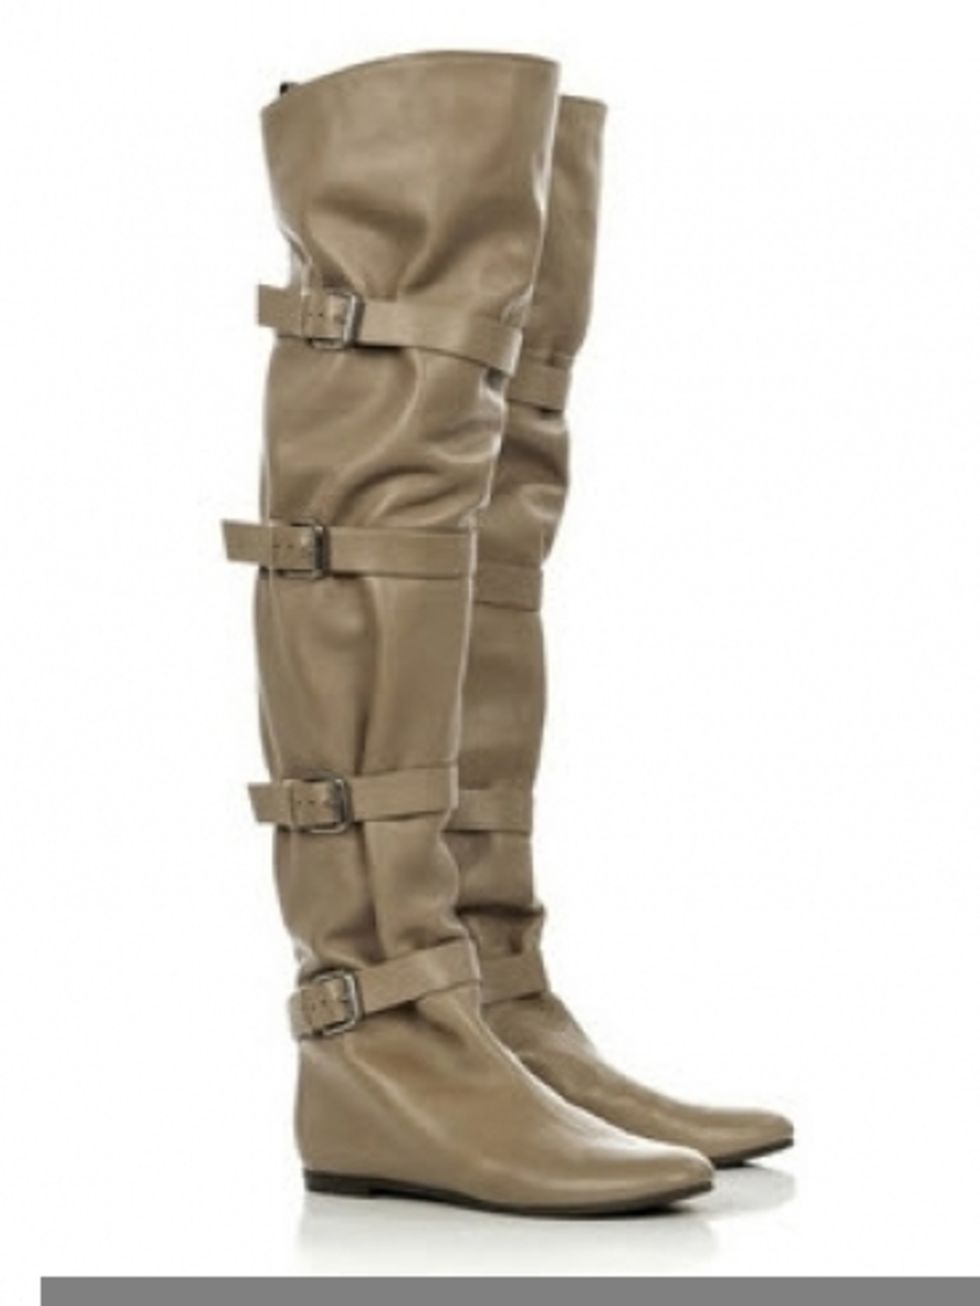 Brown, Boot, Shoe, Tan, Beige, Leather, Riding boot, Fashion design, Knee-high boot, High heels, 